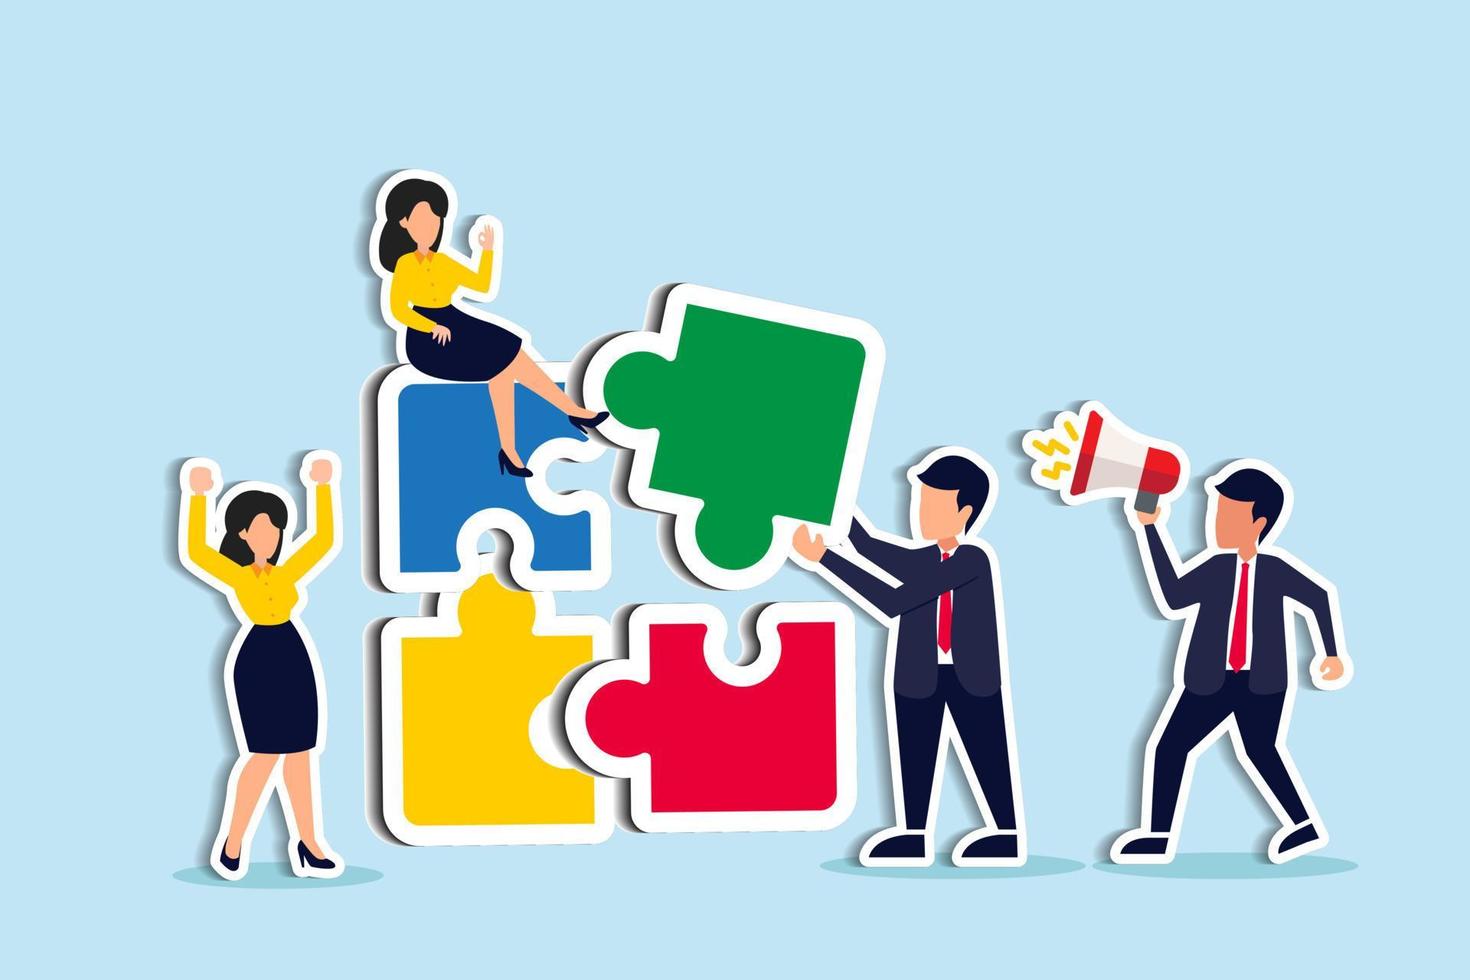 Employee improve involvement employee success together, increase value and workplace motivation, happy business people, employees help complete jigsaw with lleader's instructions in office vector